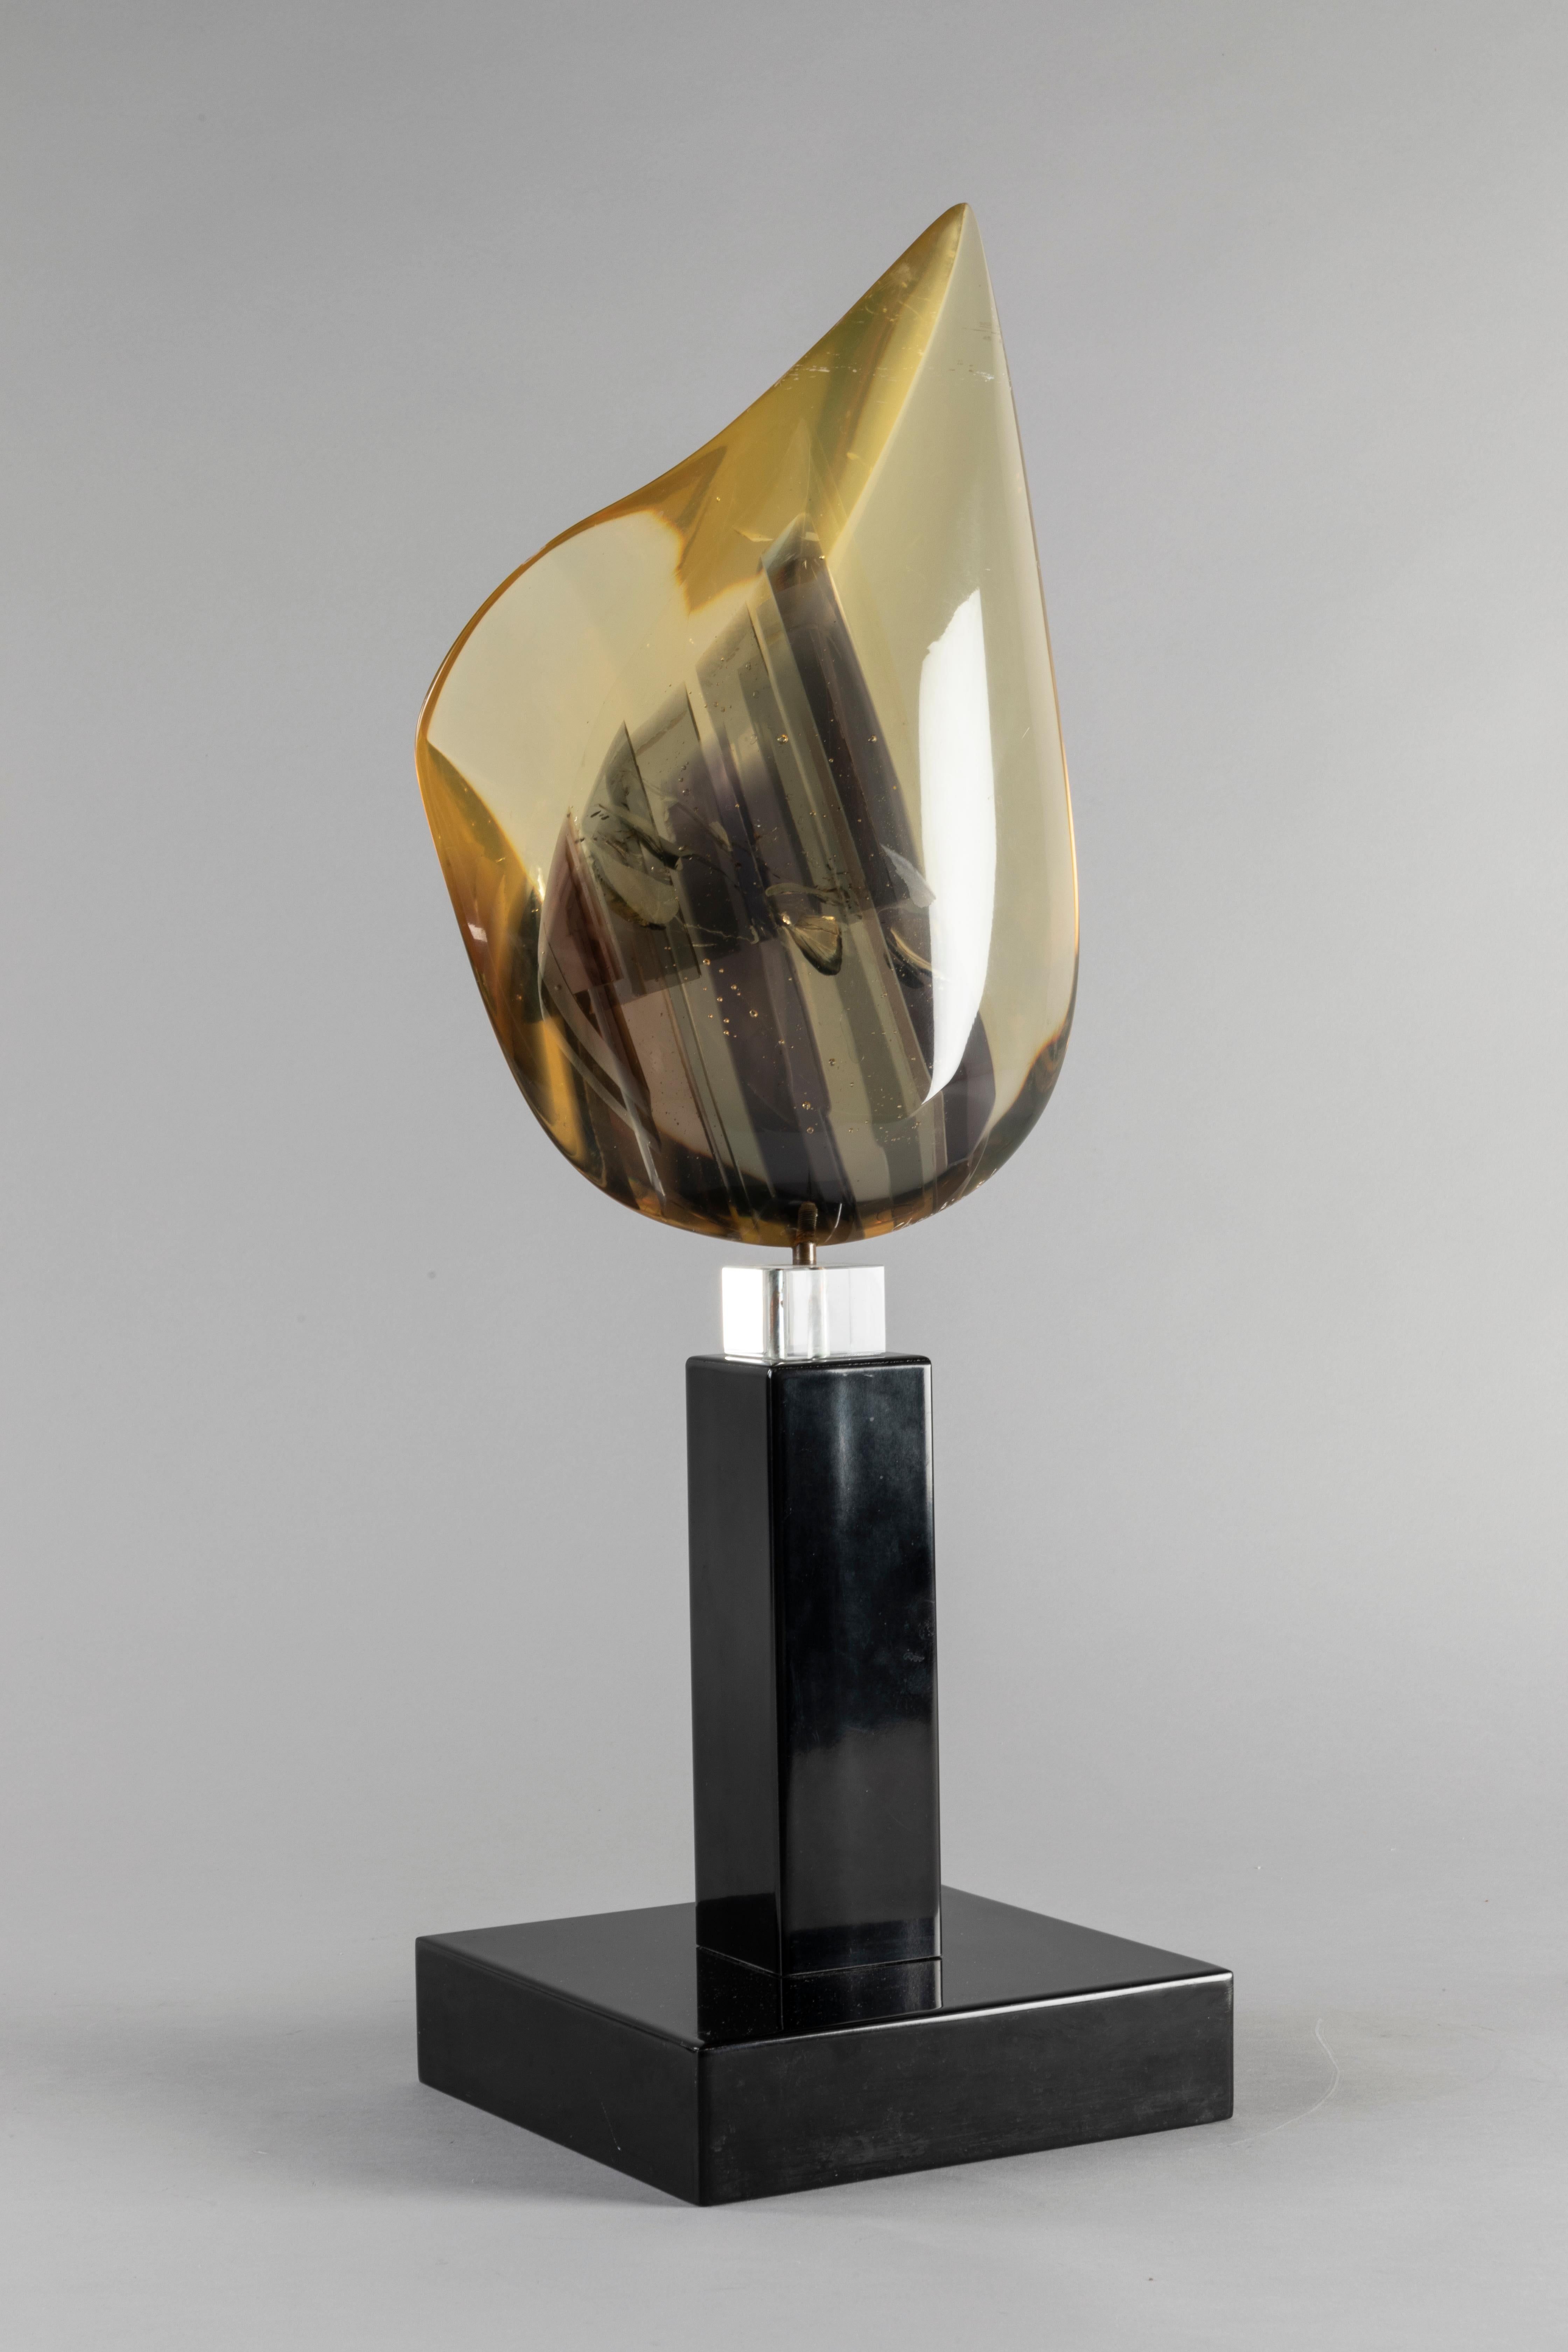 In 1970s Pierre Charbin (Gilles his real name) created most of his pieces in resin. This amber sculpture color is unique with inclusions inside, it comes from a private collection. (Signed and dated). Gilles Charbin collaborated with famous interior